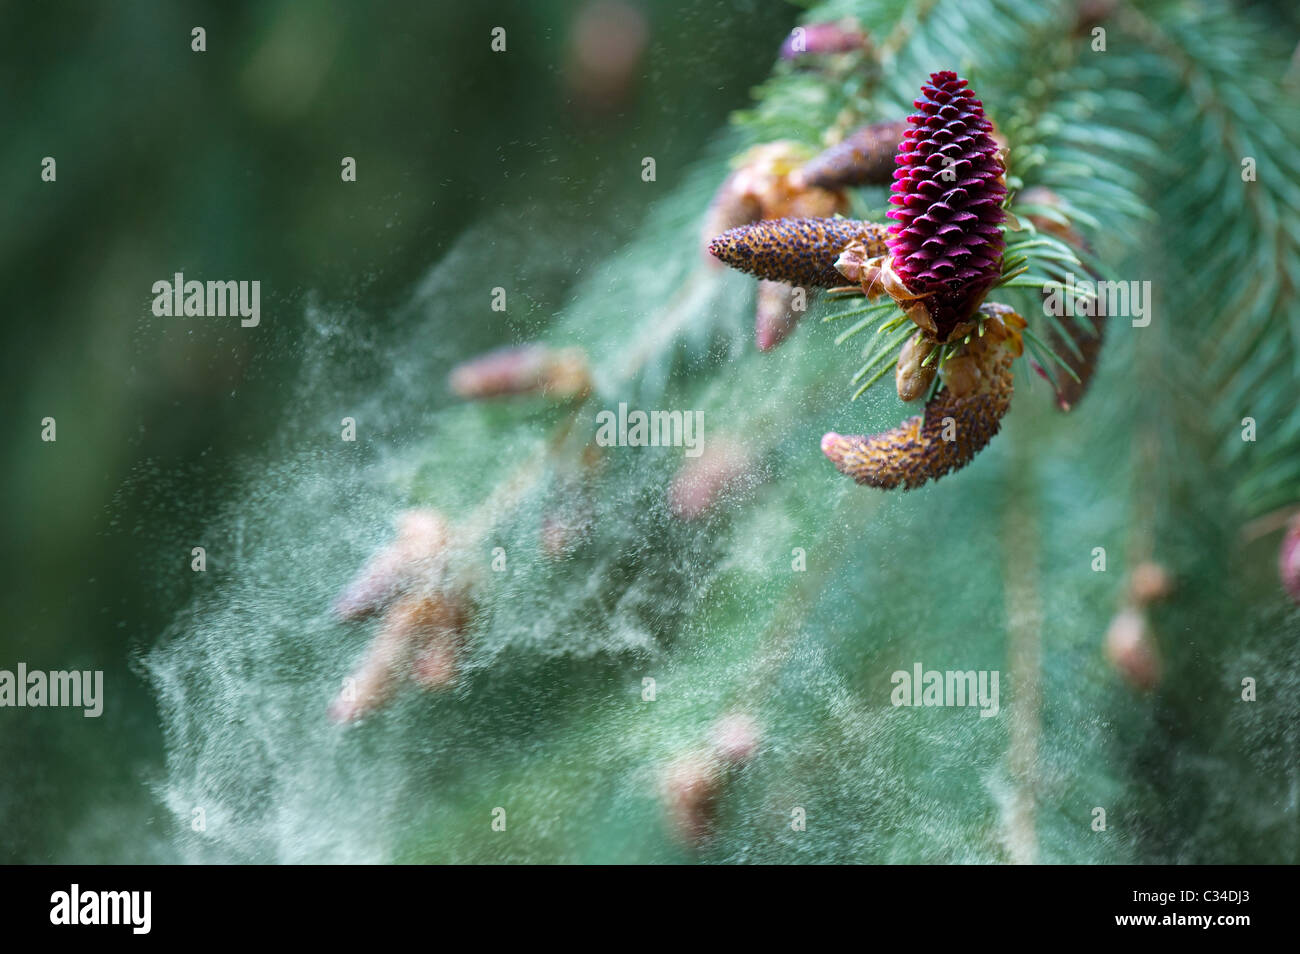 Picea likiangensis. Luiang spruce. Tree flowers releasing pollen Stock Photo